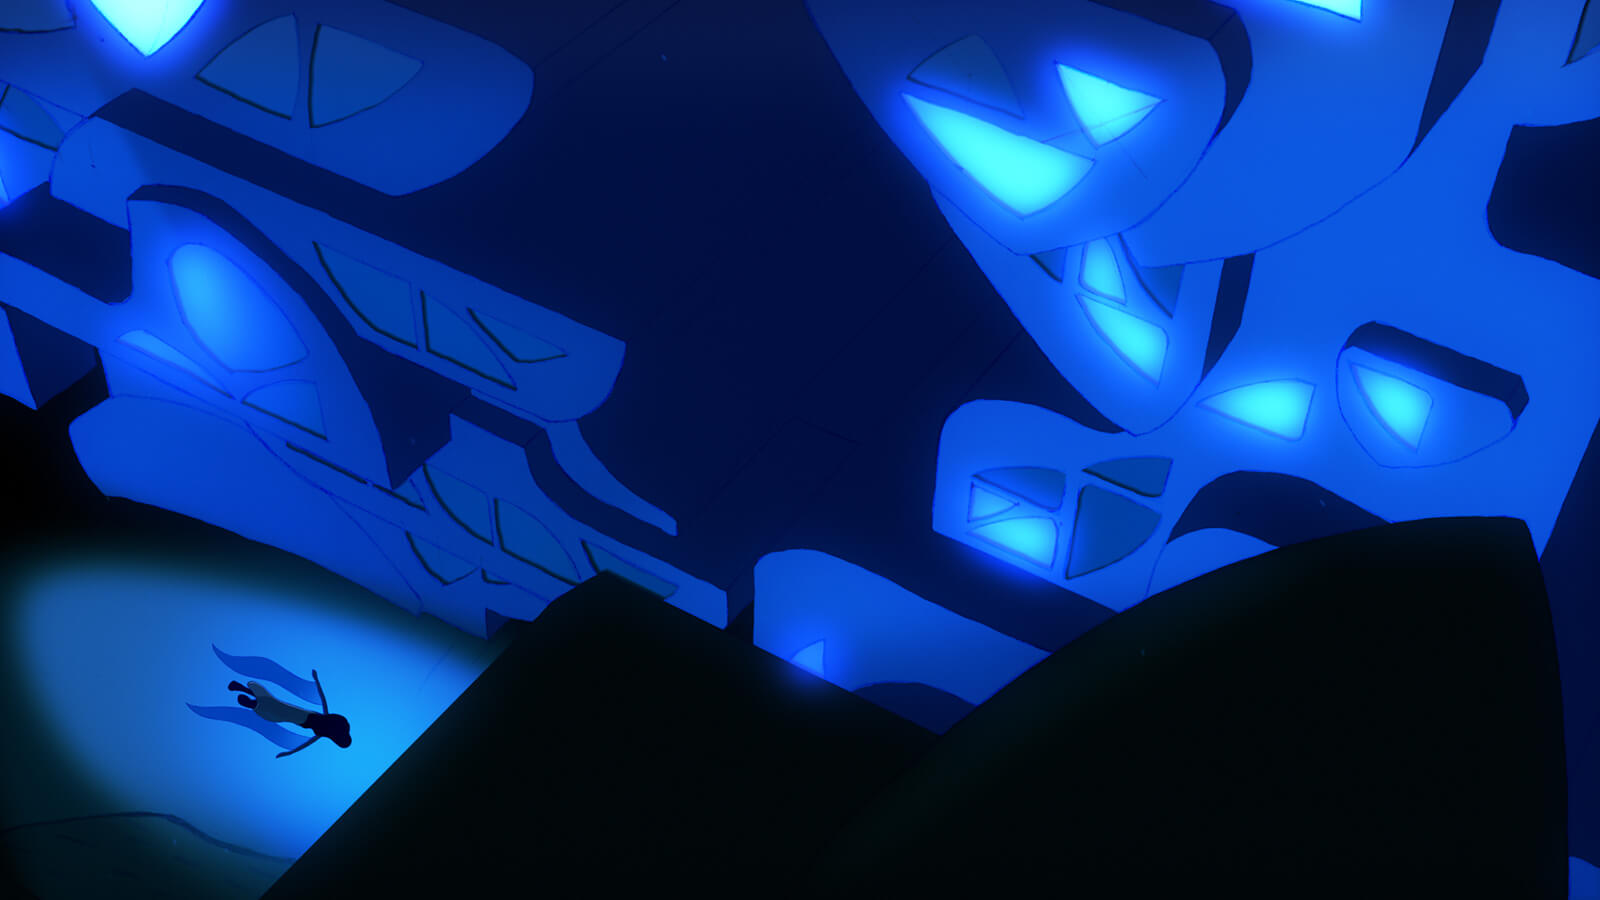 A human figure is seen swimming underwater through a canyon of dark blue shapes, some displaying glowing panels of light